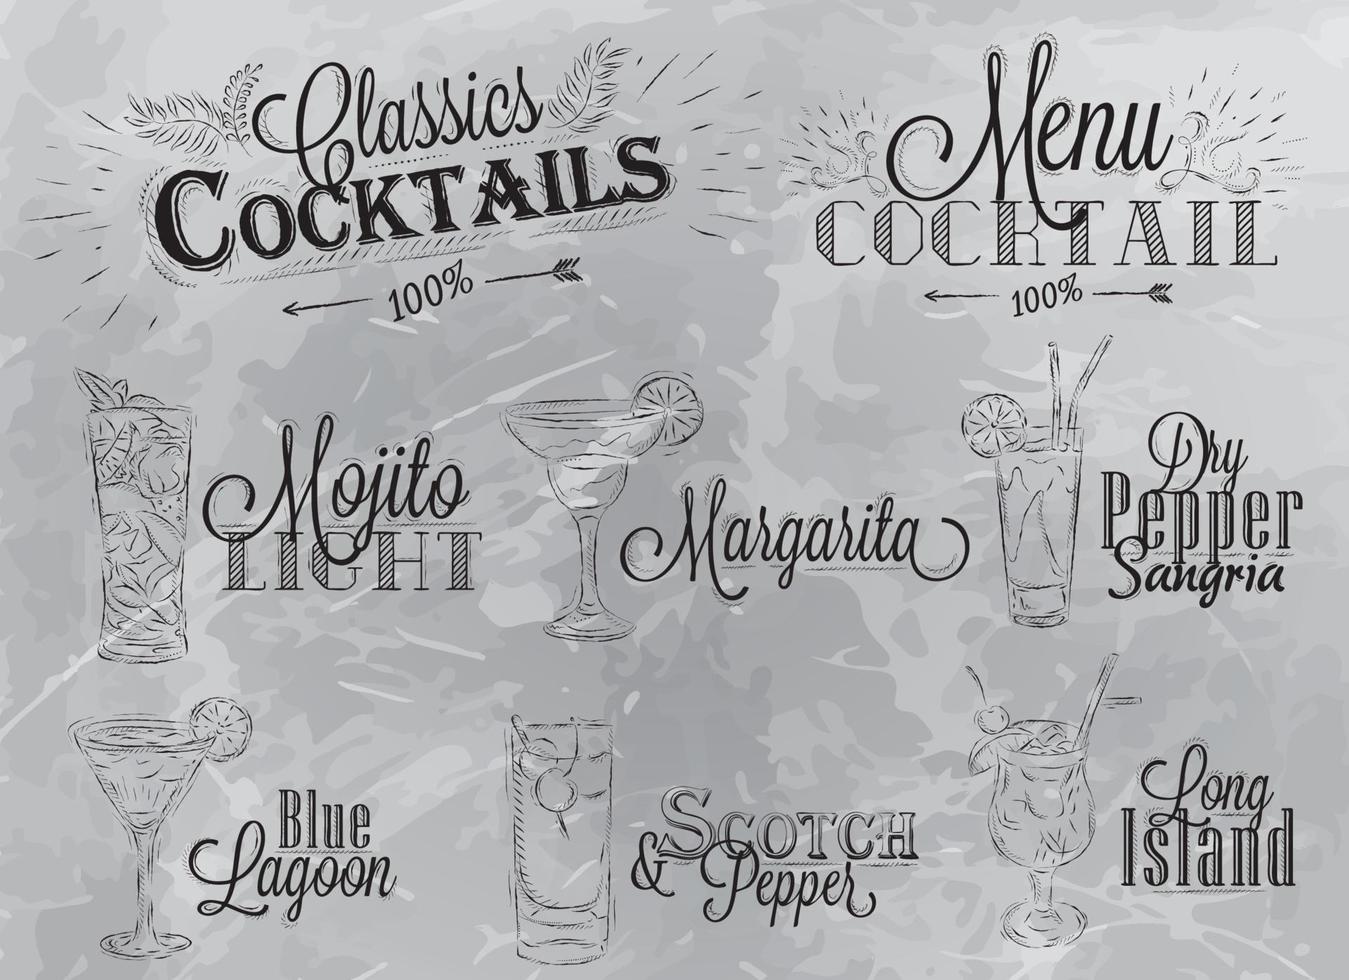 Set of cocktail menu in vintage style stylized drawing in charcoal on gray background, Mojito cocktails with illustrated, the blue lagoon margarita Scotch vector